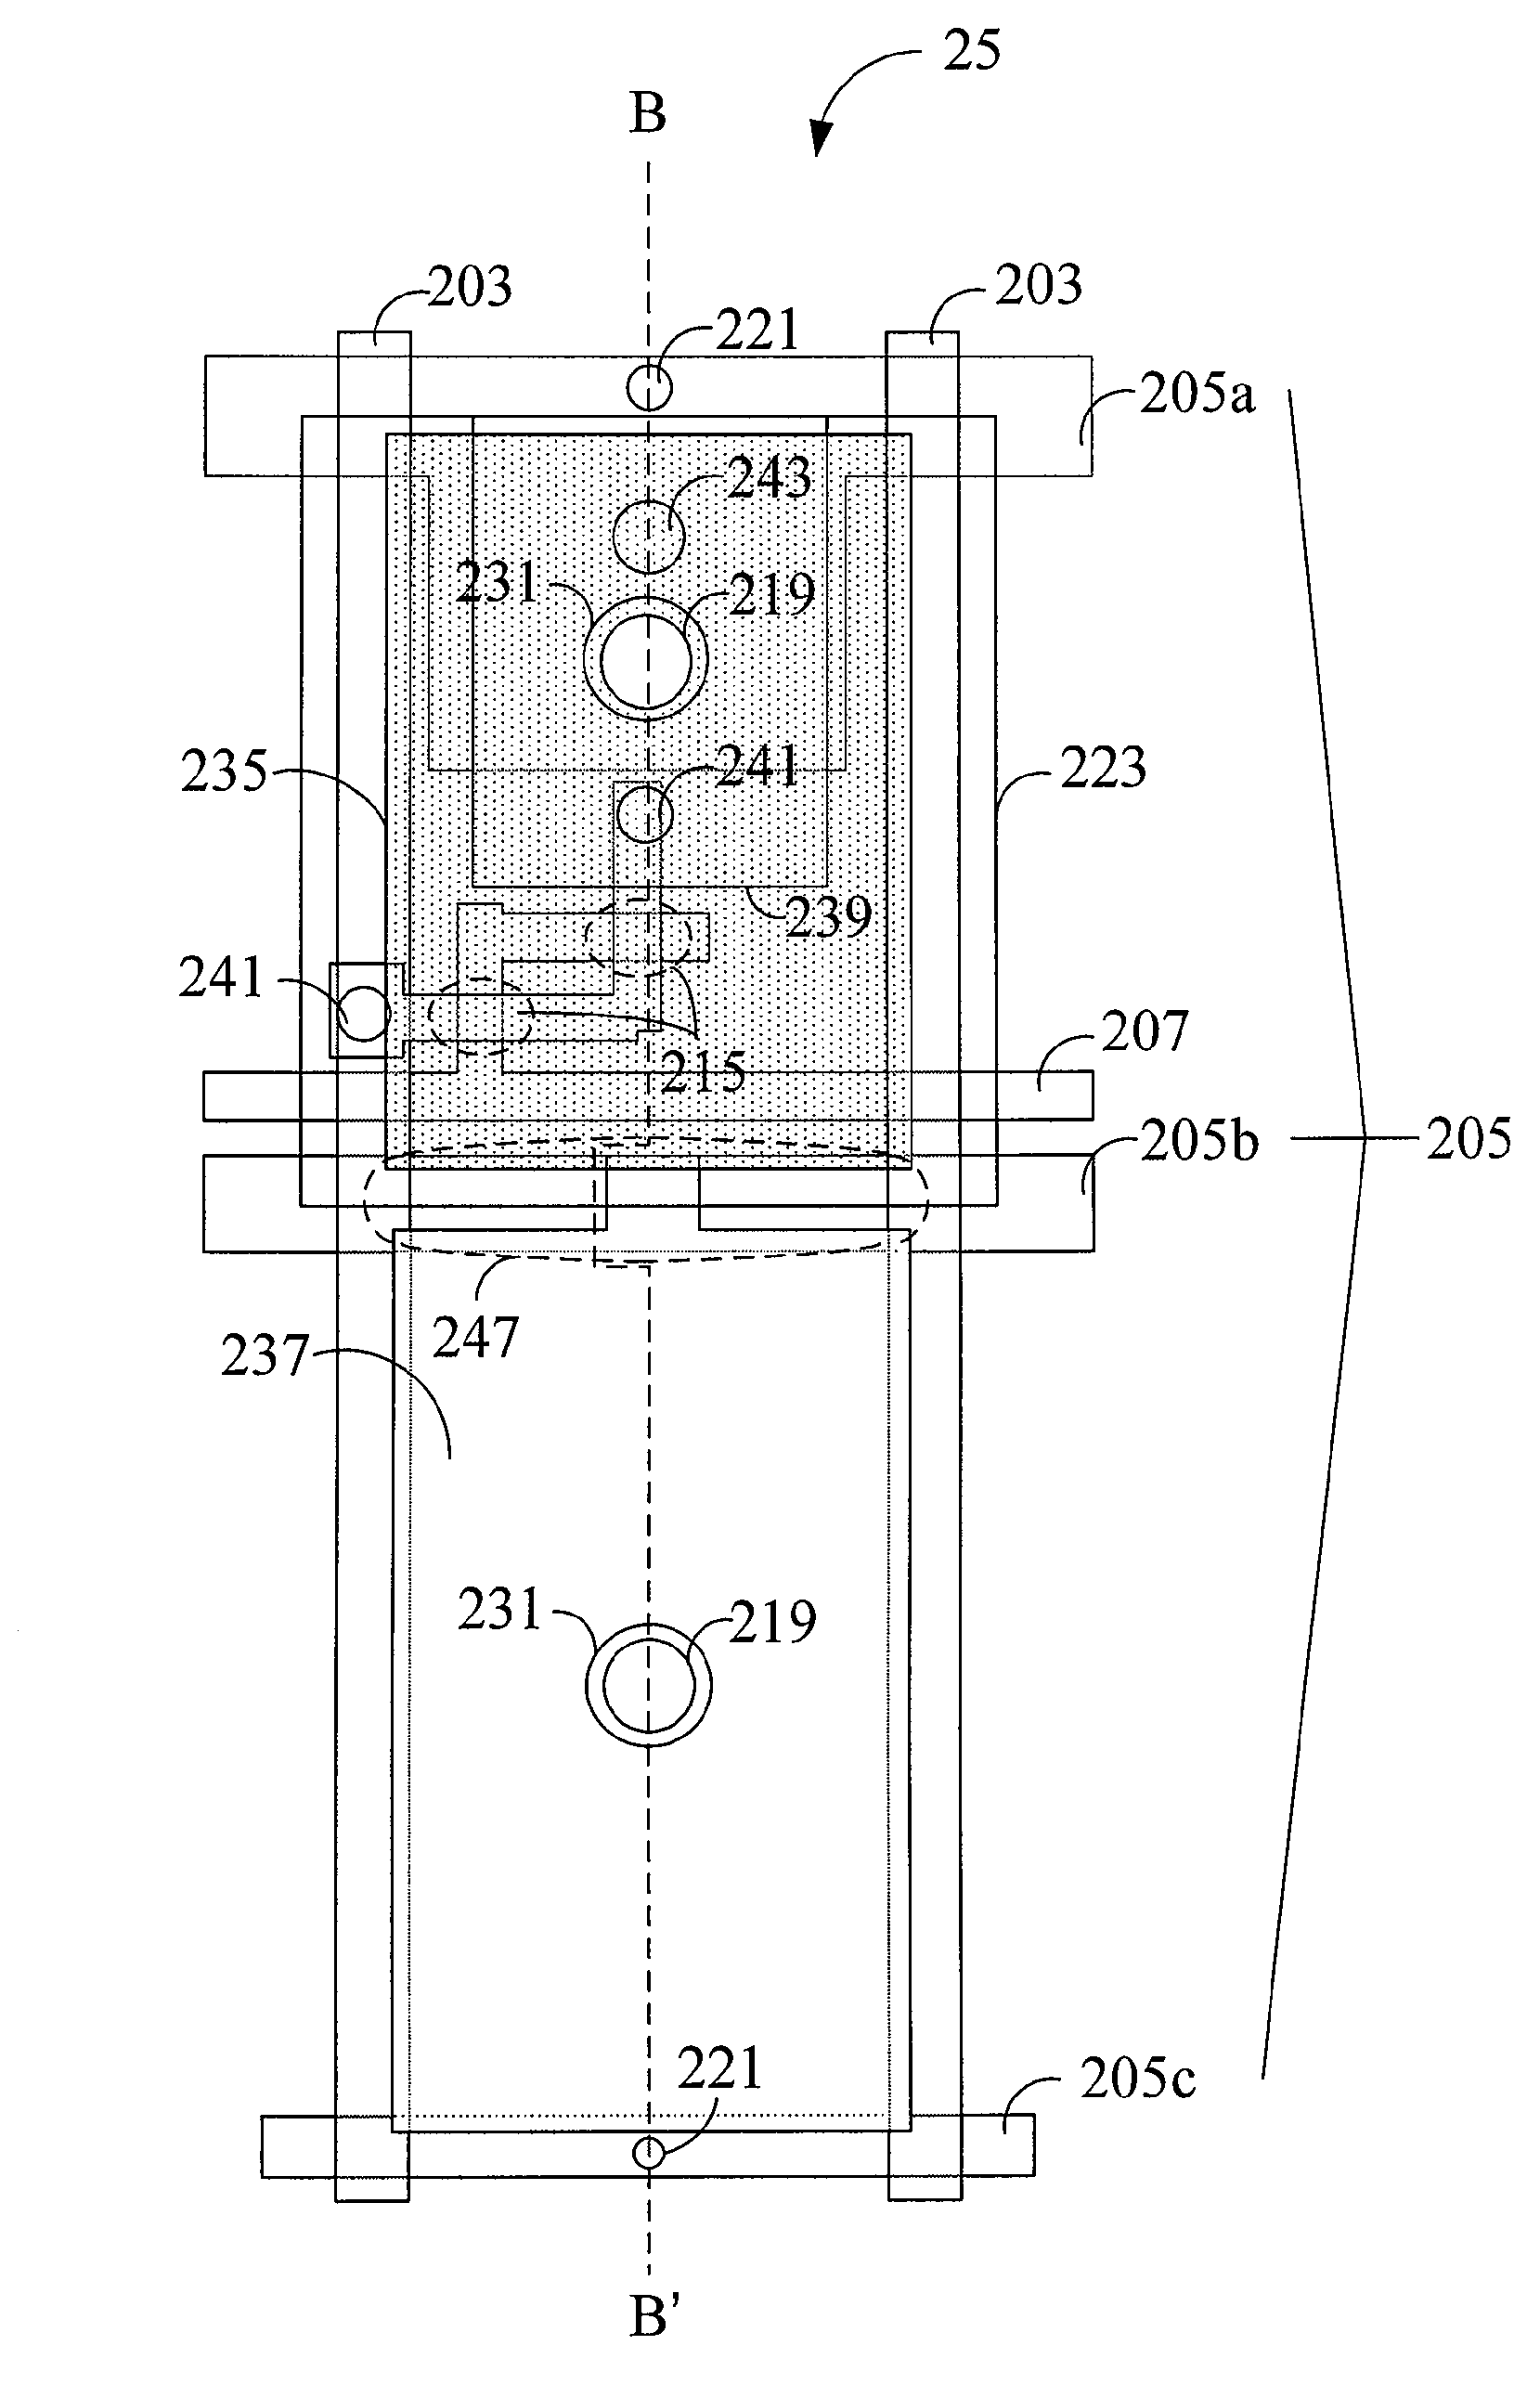 Display Panel, Electro-Optical Device, and Methods for Fabricating the Same